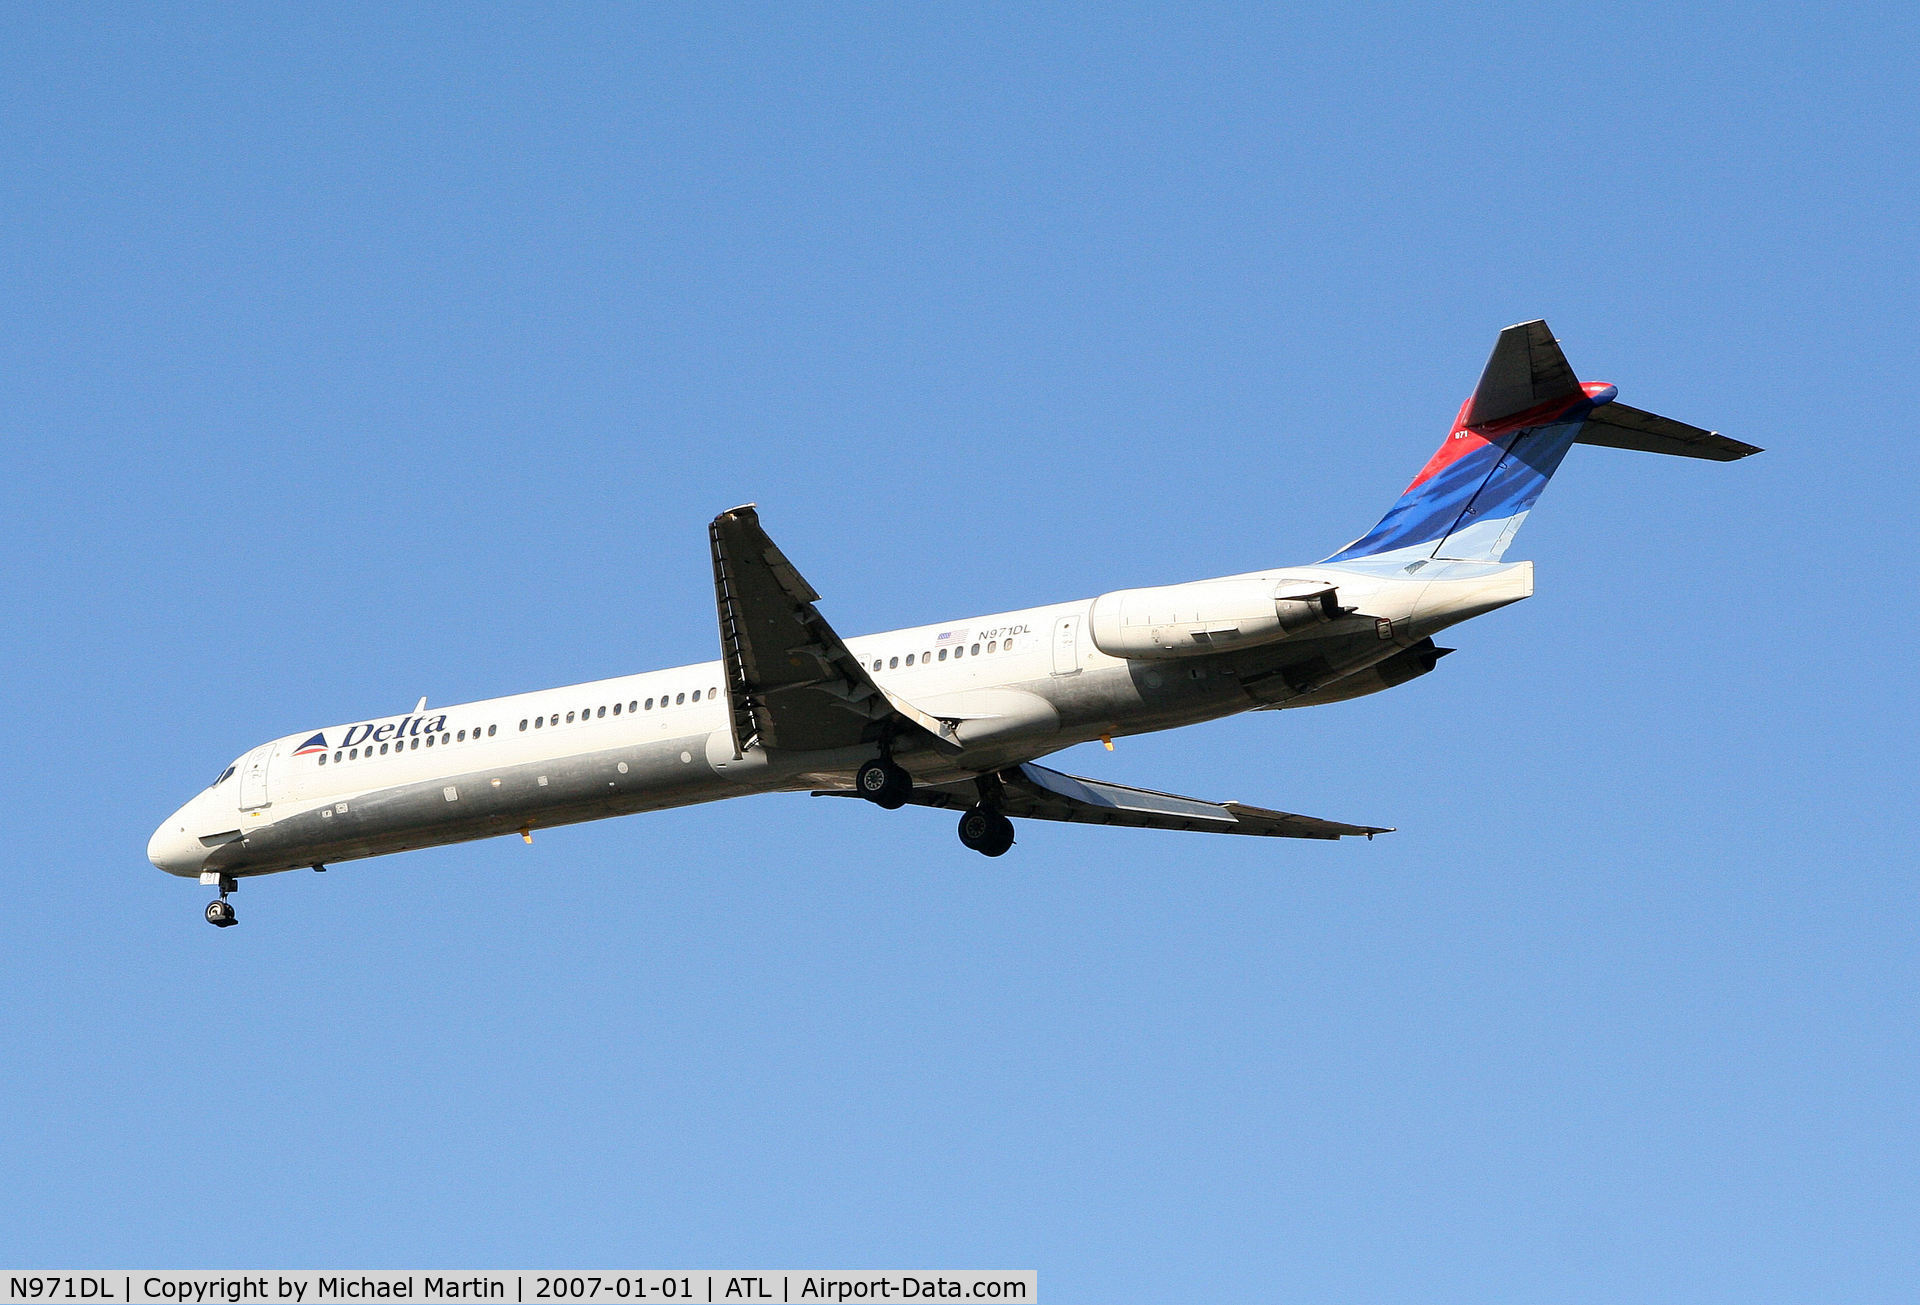 N971DL, 1991 McDonnell Douglas MD-88 C/N 53214, Over the numbers of 26L